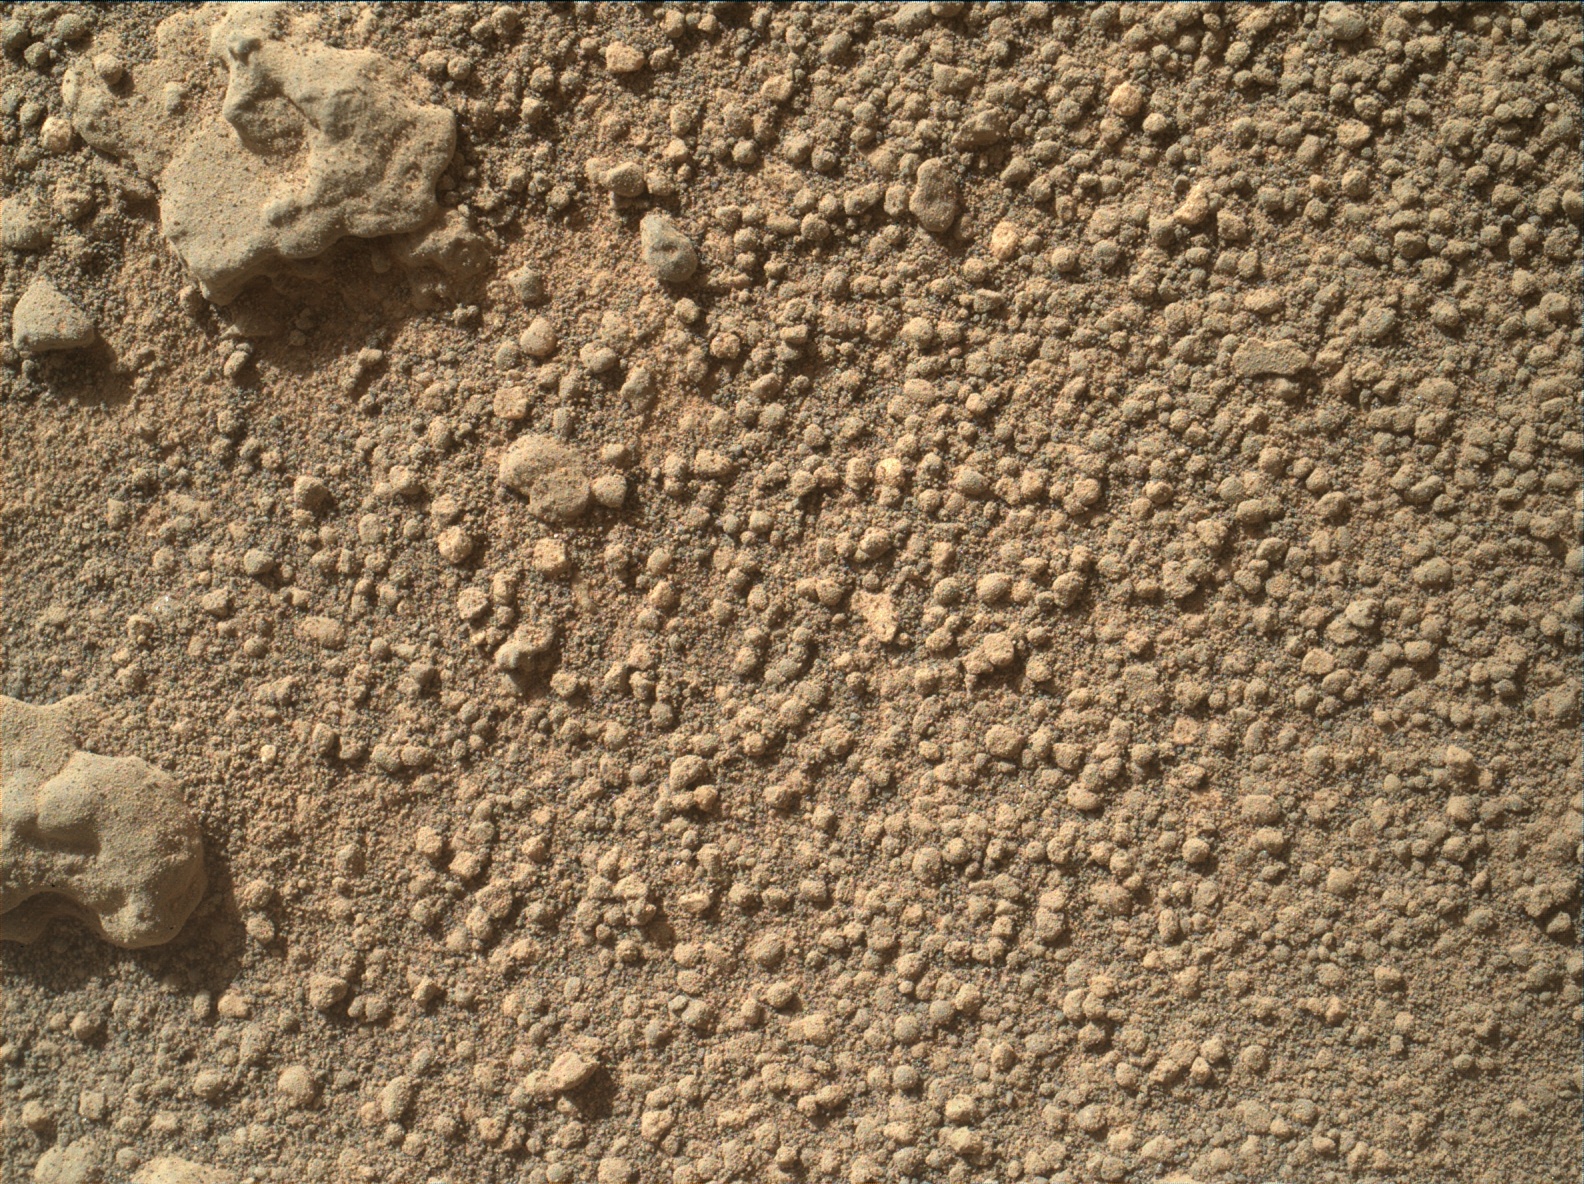 Nasa's Mars rover Curiosity acquired this image using its Mars Hand Lens Imager (MAHLI) on Sol 1278